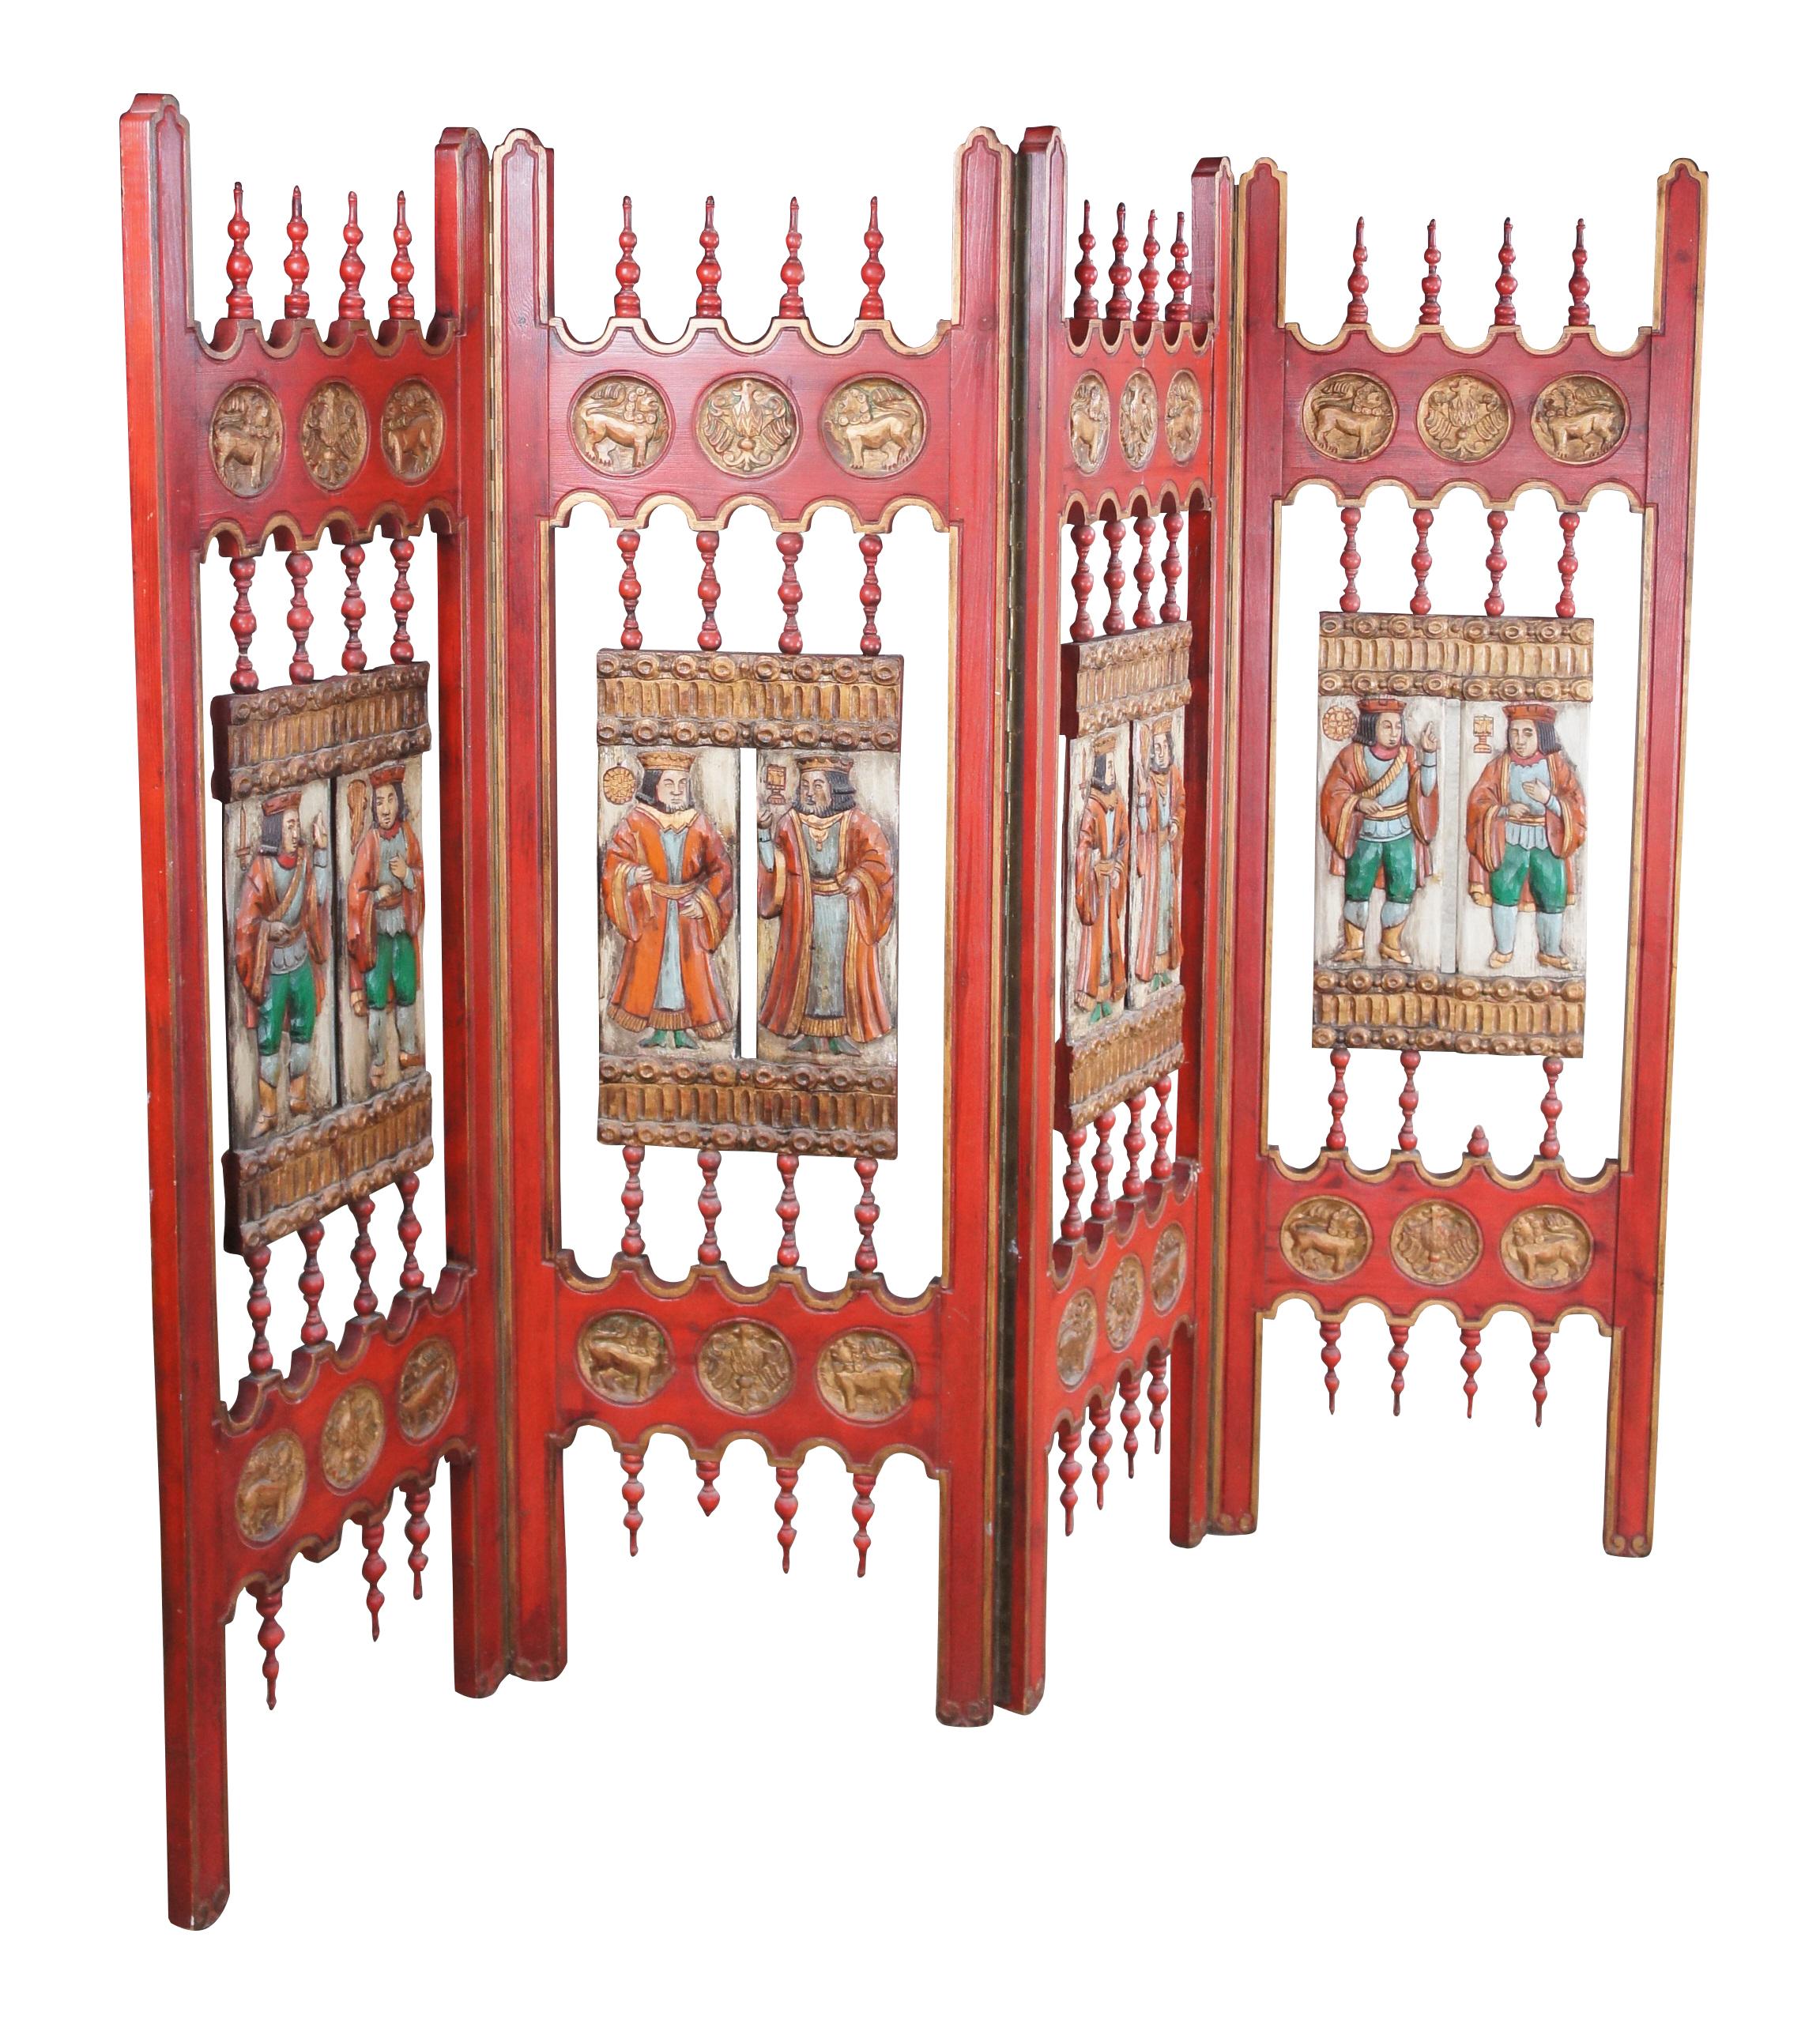 Vintage gothic / medieval four panel room divider screen.  Made of red painted oak featuring reticulated turned spindle design with figural kings and noblemen plaques at the center, flanked by gold eagle and lion medallions.

DIMENSIONS

each panel